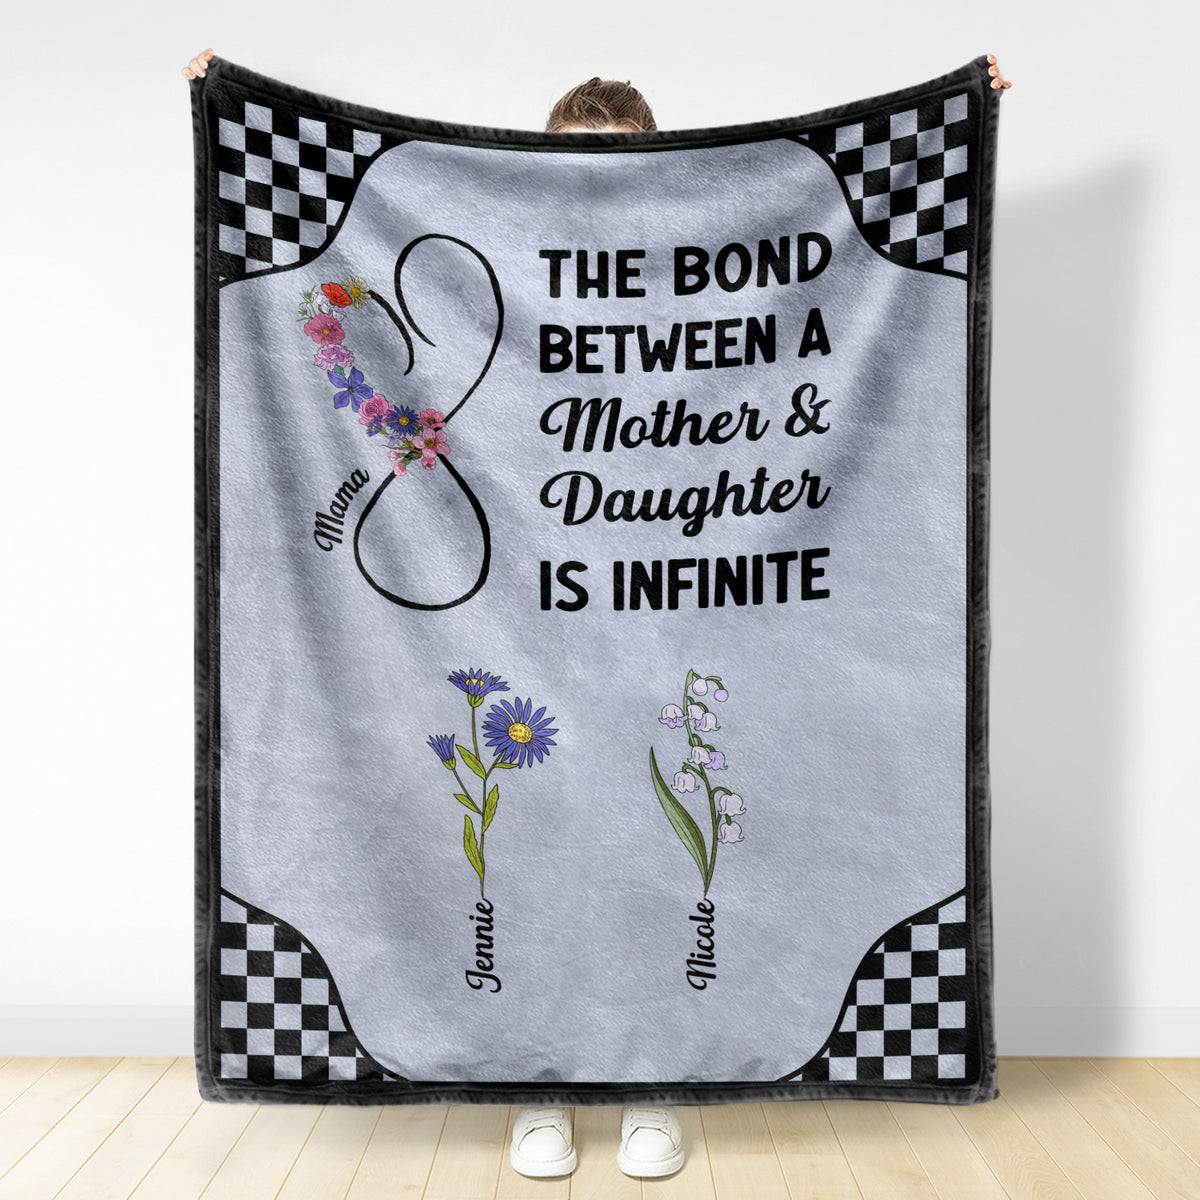 Birth Month Flowers A Mother And Daughter - Gift For Mother Daughter - Personalized Fleece Blanket, Sherpa Blanket